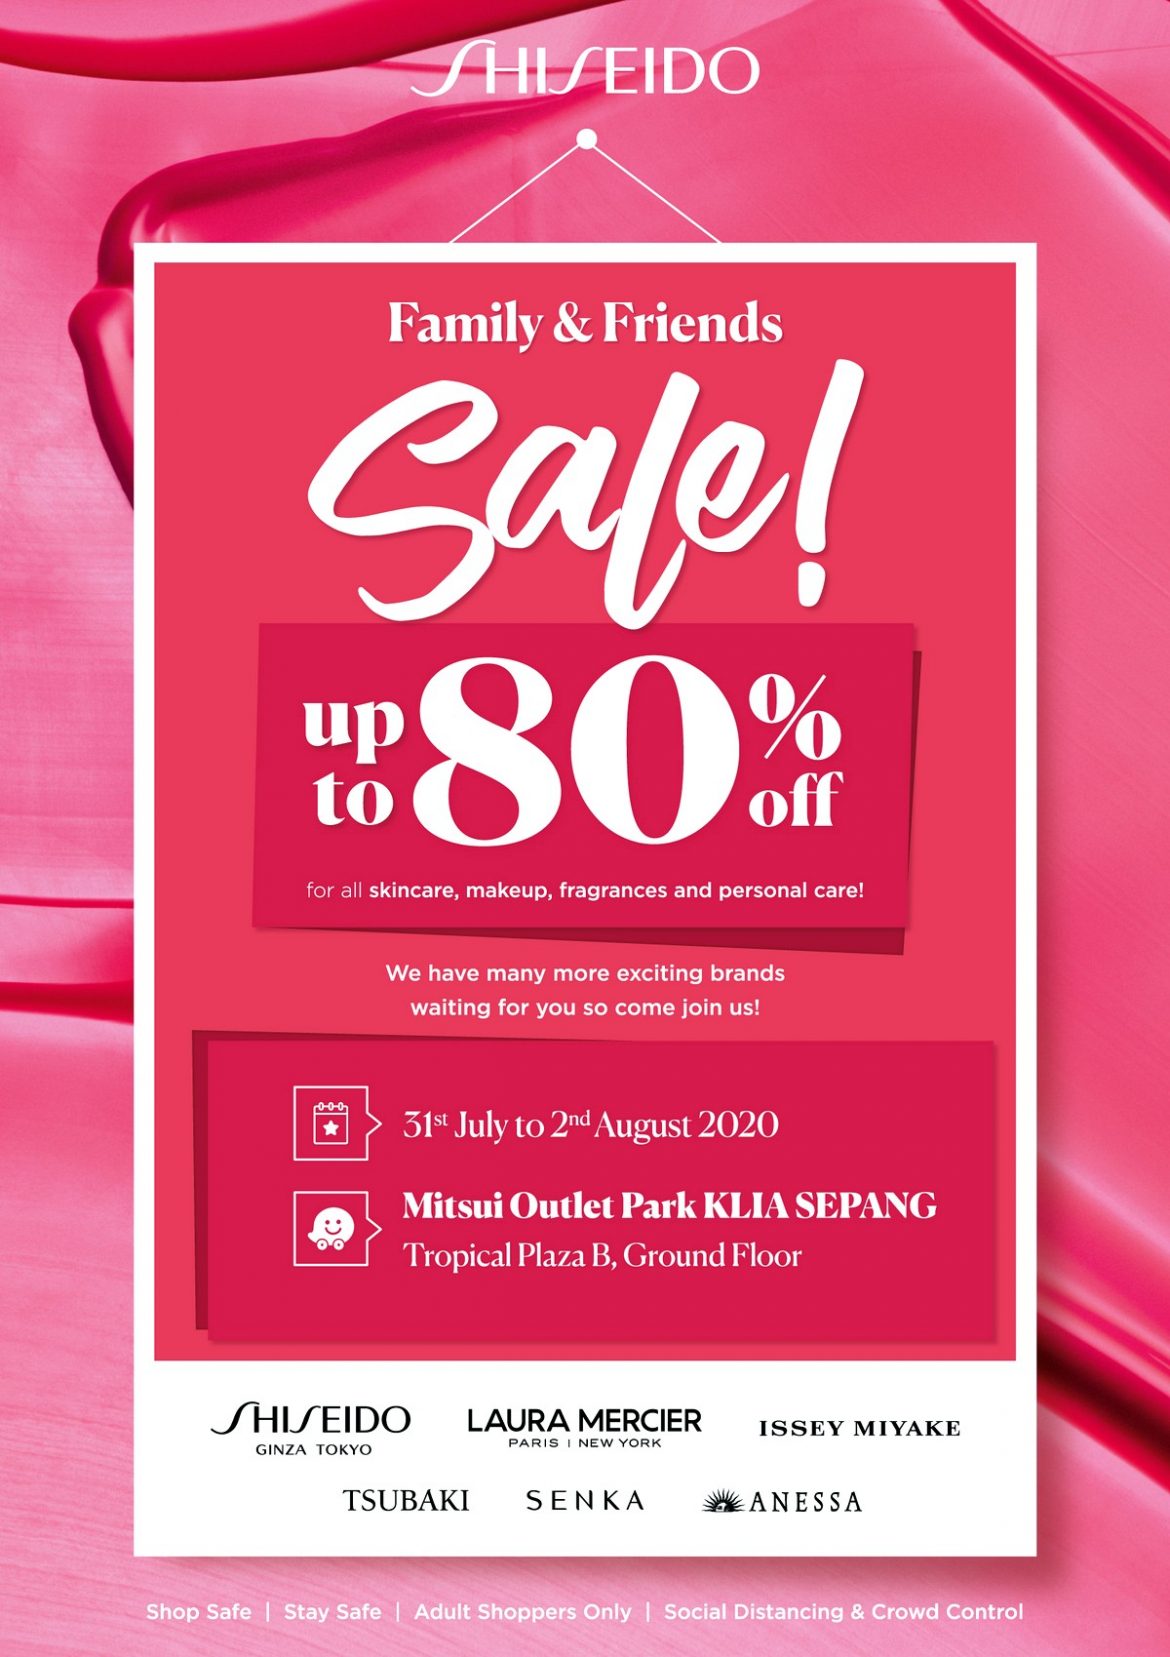 31 Jul2 Aug 2020 Shiseido Family & Friends Sale! Up to 80 OFF